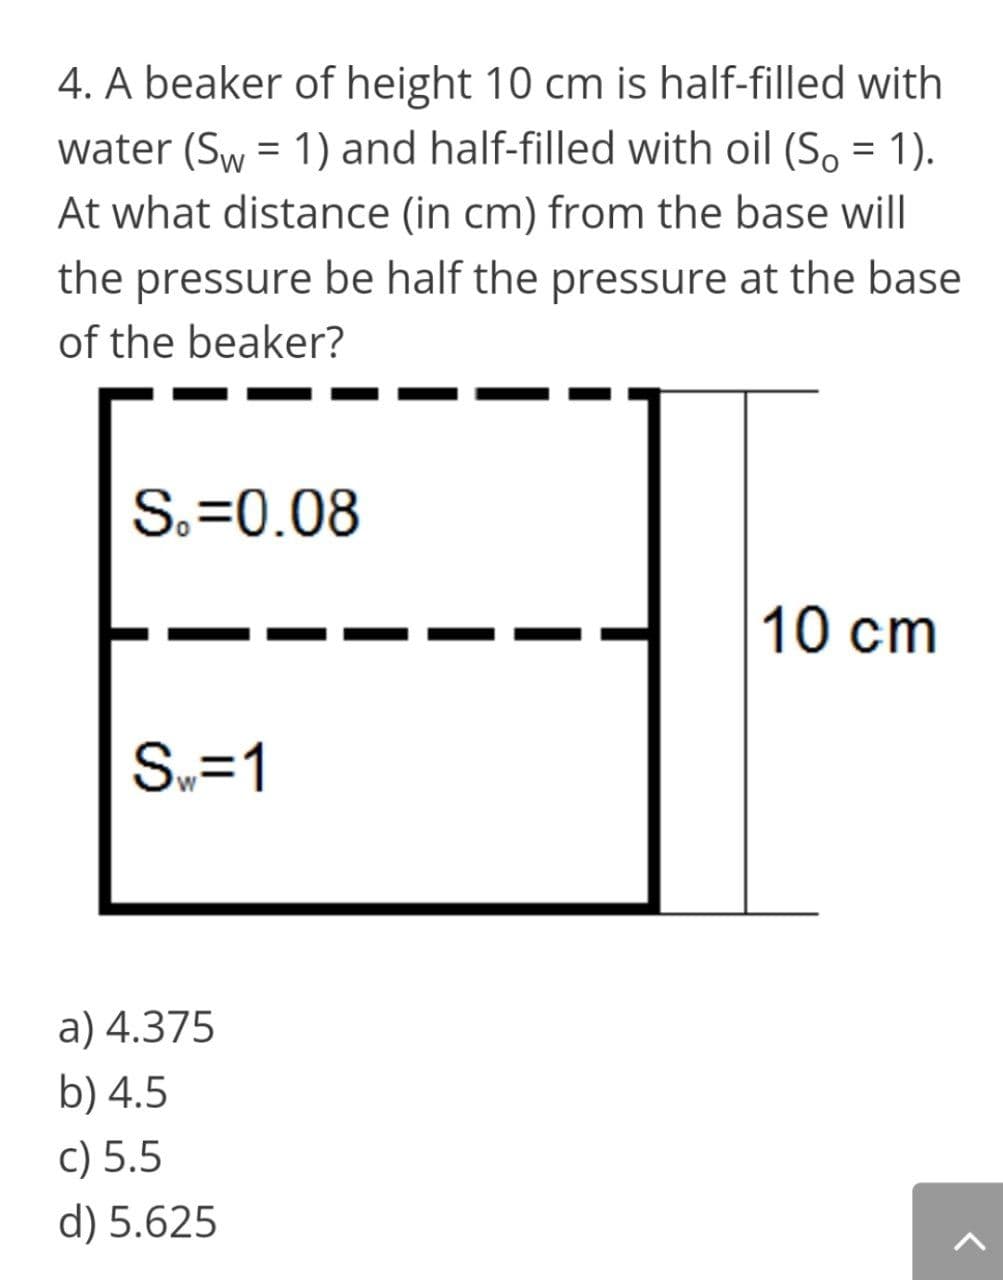 4. A beaker of height 10 cm is half-filled with
water (Sw = 1) and half-filled with oil (So = 1).
At what distance (in cm) from the base will
the pressure be half the pressure at the base
of the beaker?
S.=0.08
10 cm
S.=1
a) 4.375
b) 4.5
c) 5.5
d) 5.625
